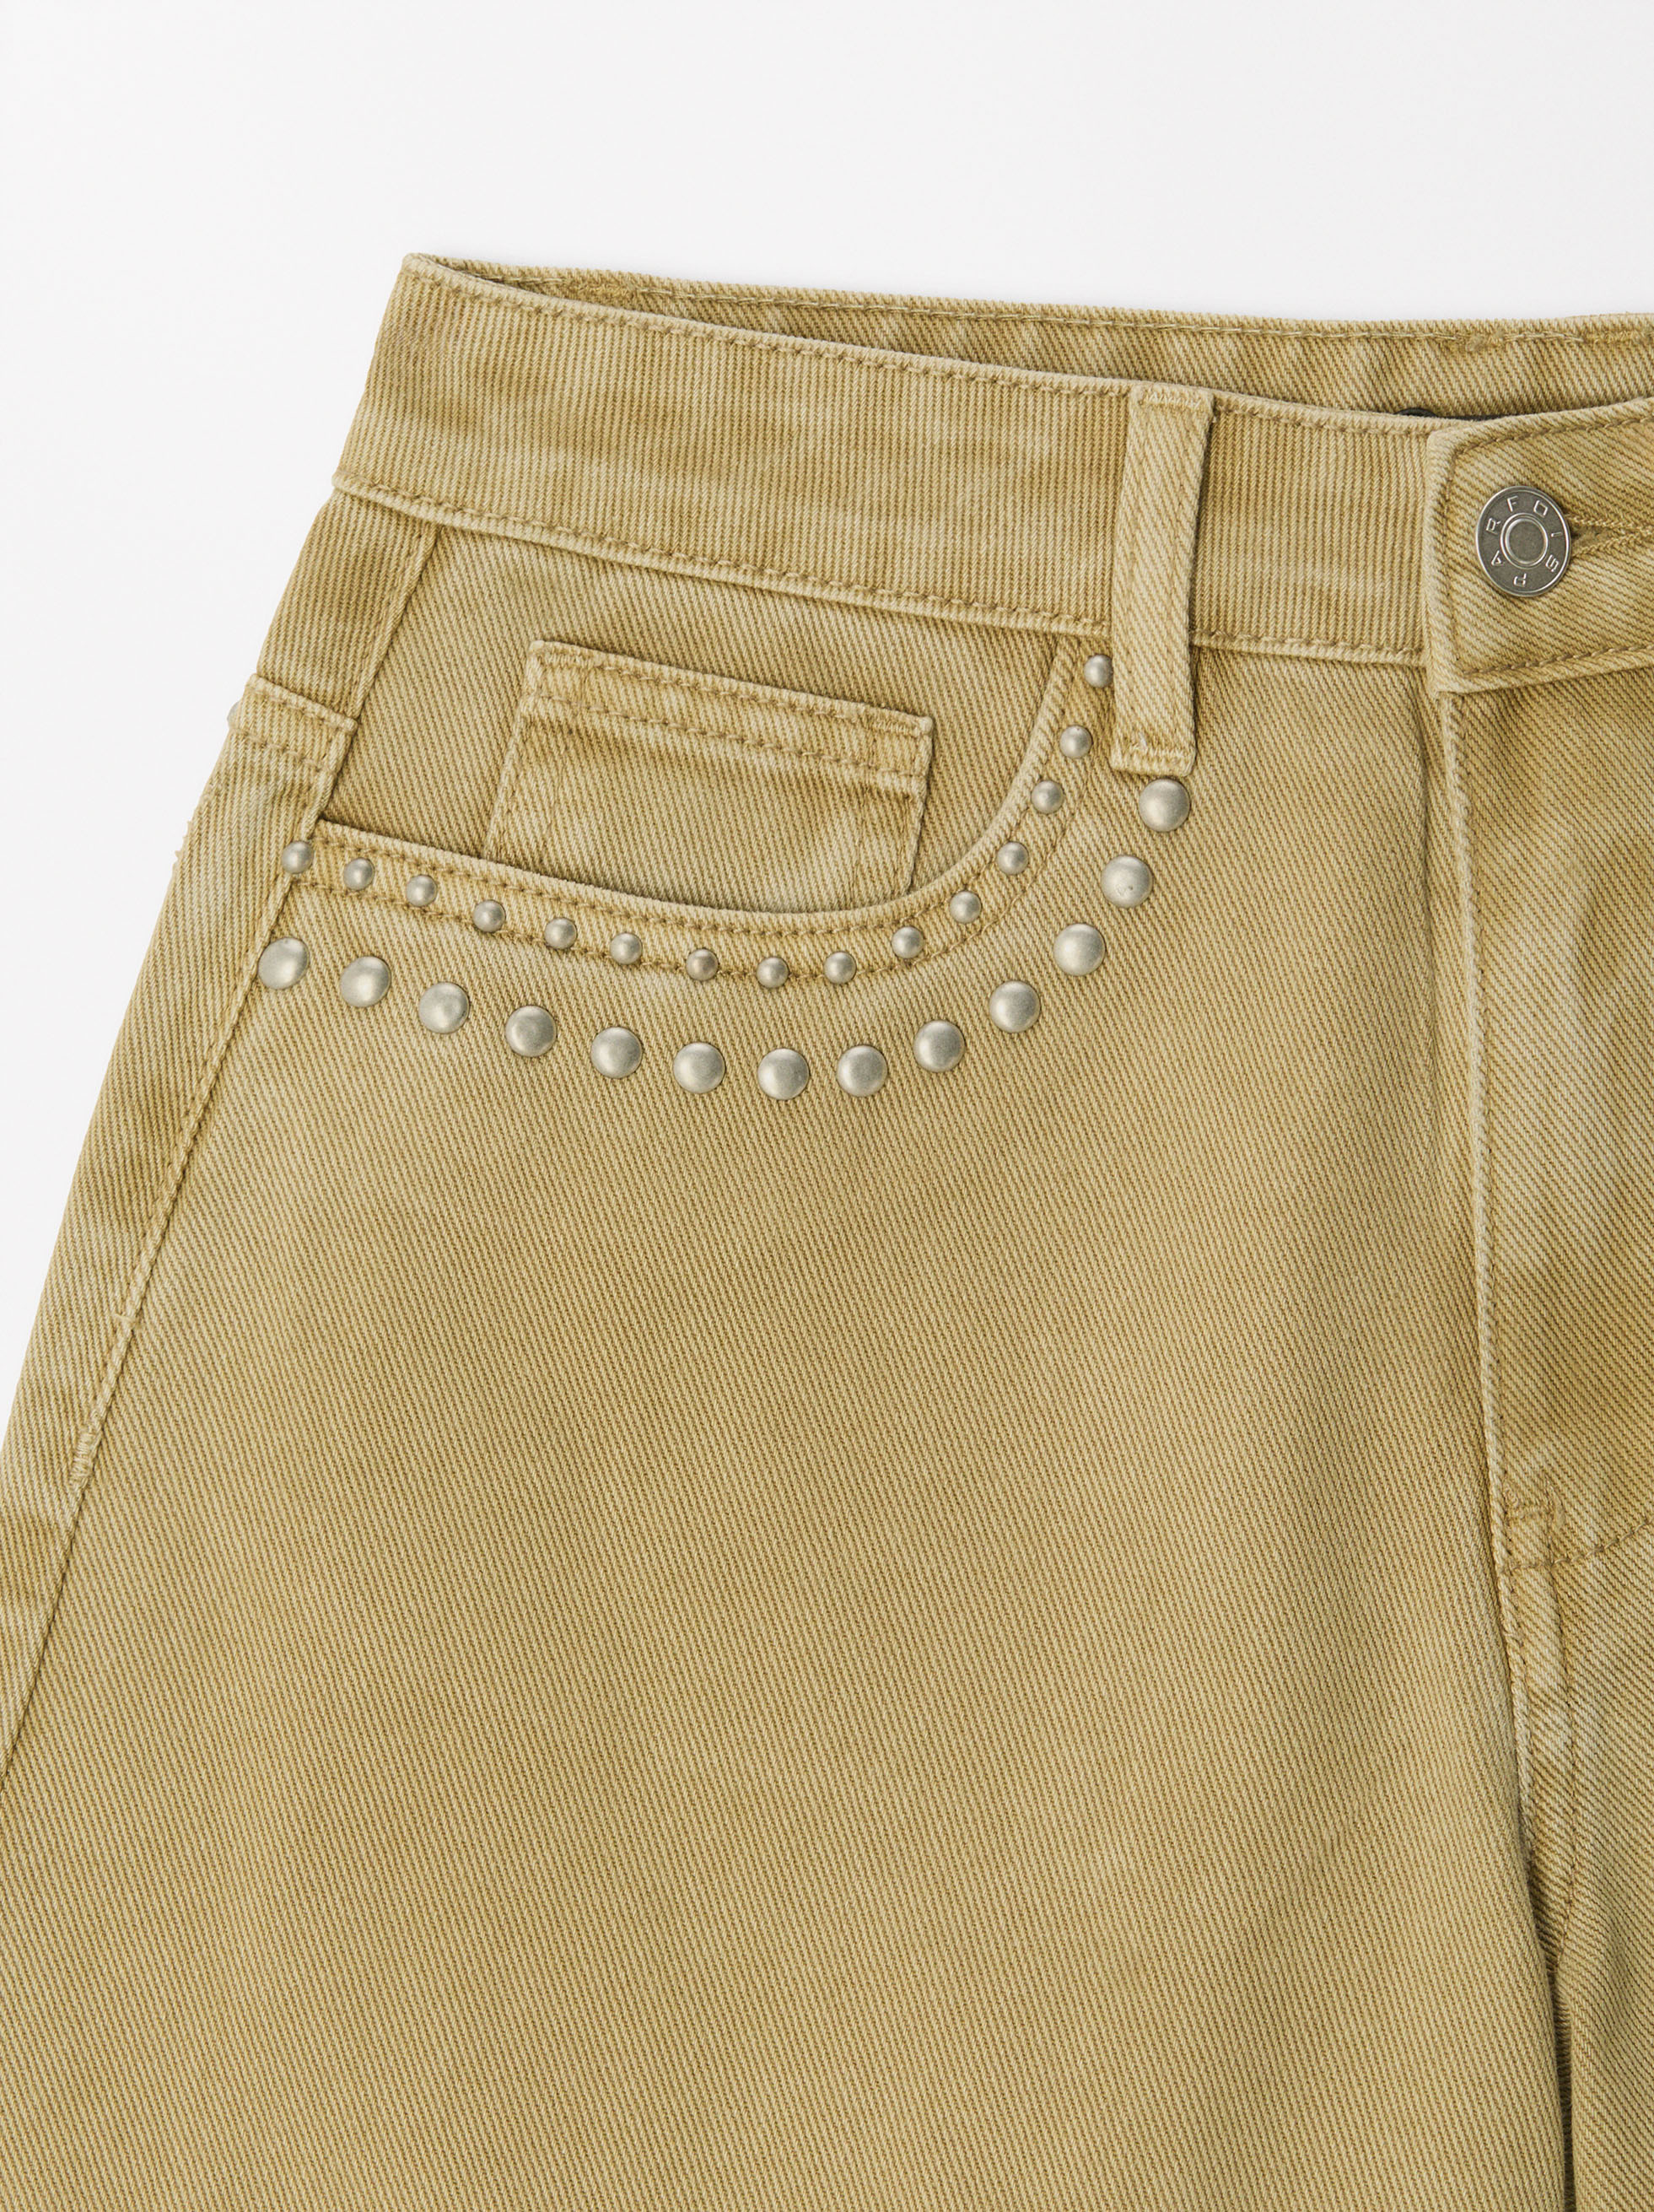 Denim Shorts With Studs image number 6.0